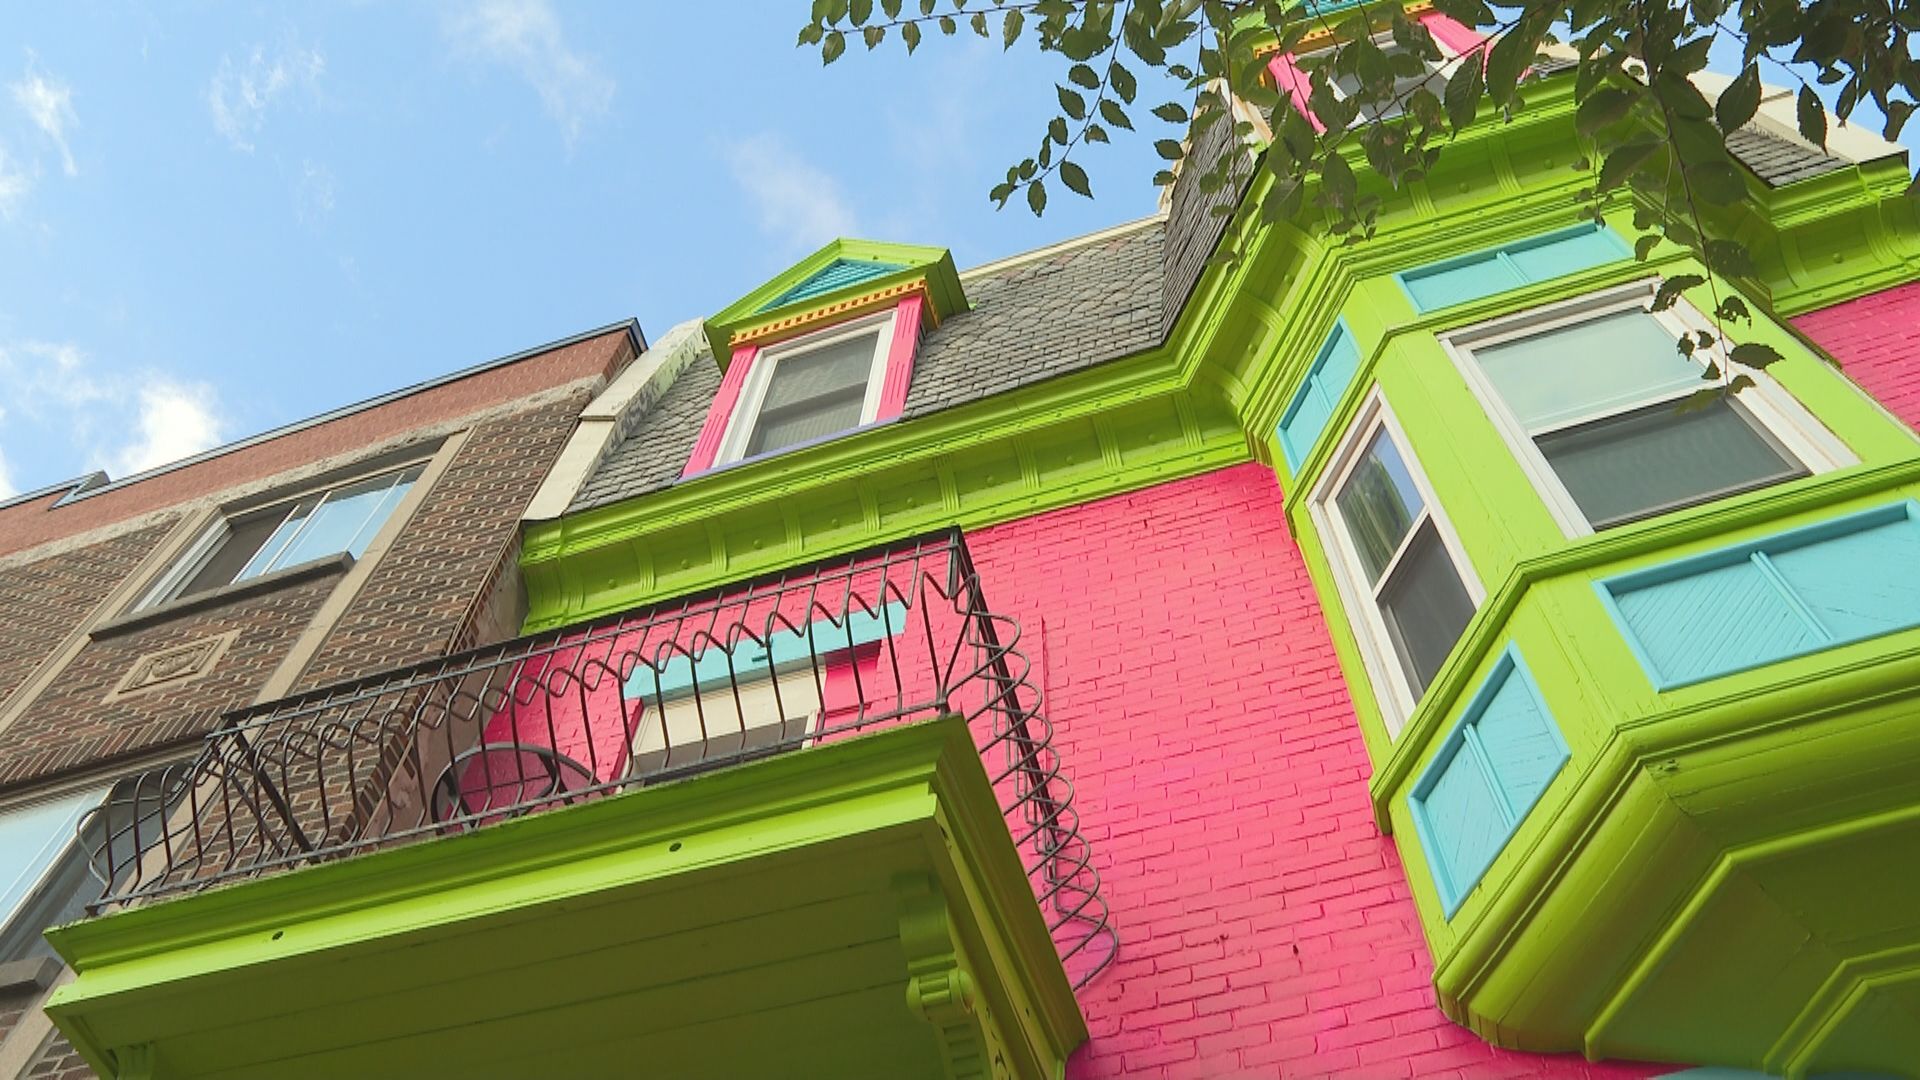 Montreal officials see red after century-old home turned into colourful billboard